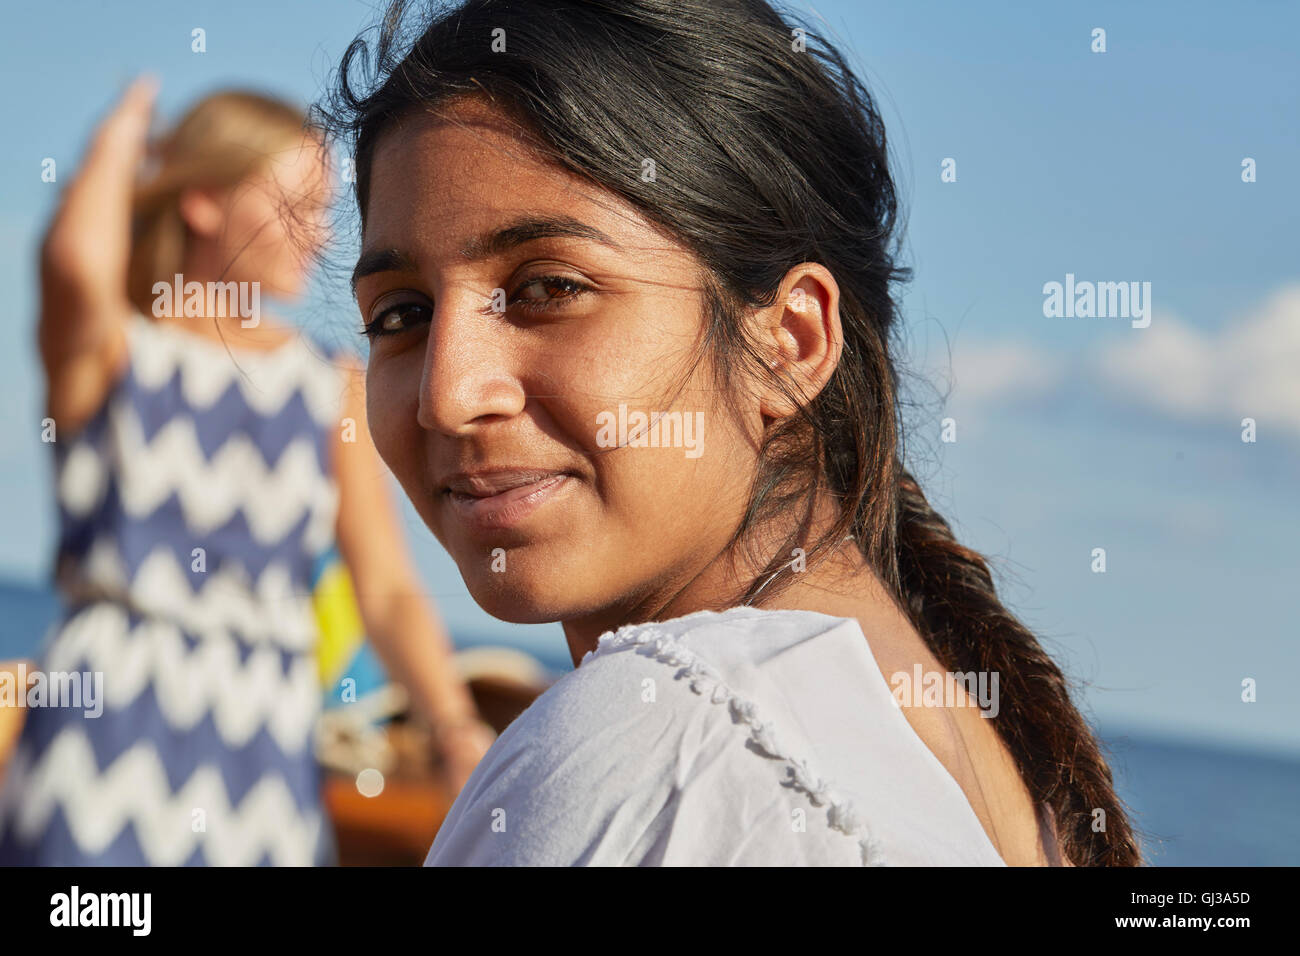 Young woman looking over shoulder at camera smiling Stock Photo